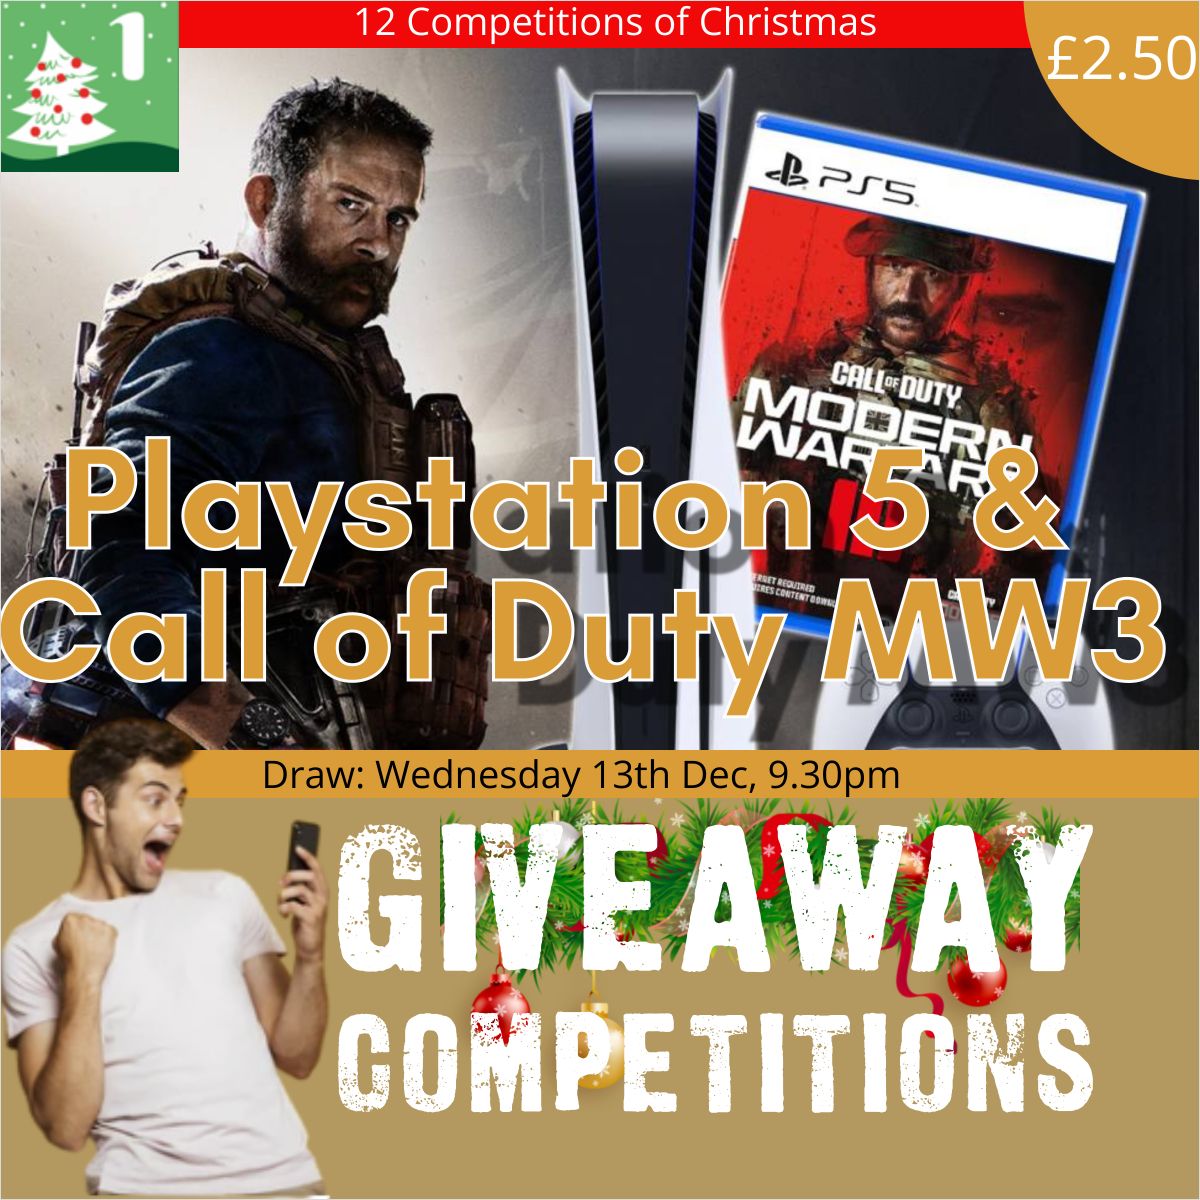 PS5 + Call of Duty Modern Warfare 3 - Giveaway Competitions